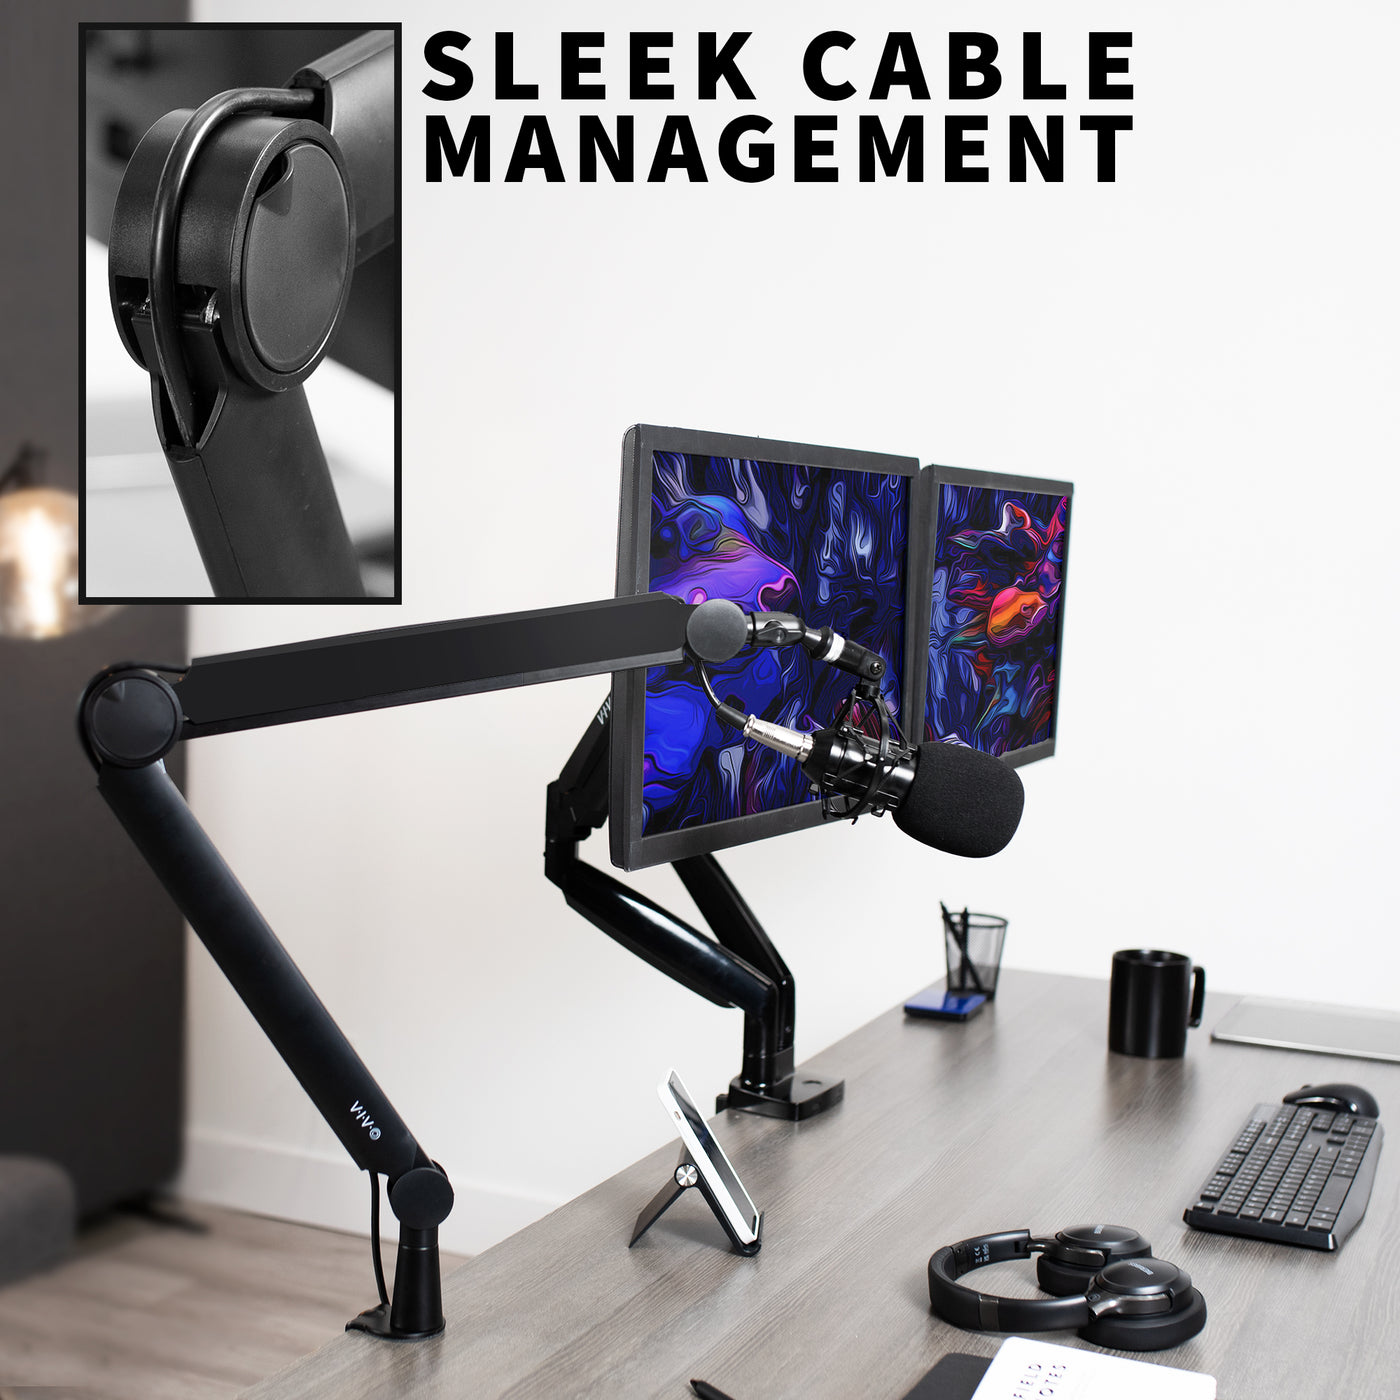  Blue Yeti Microphone Arm - Premium Boom Arm for Blue Yeti,  Heavy Duty Blue Yeti Mic Arm and Cable Management, Great for Gaming and  Streaming, 360° Rotatable Blue Yeti Mic Stand